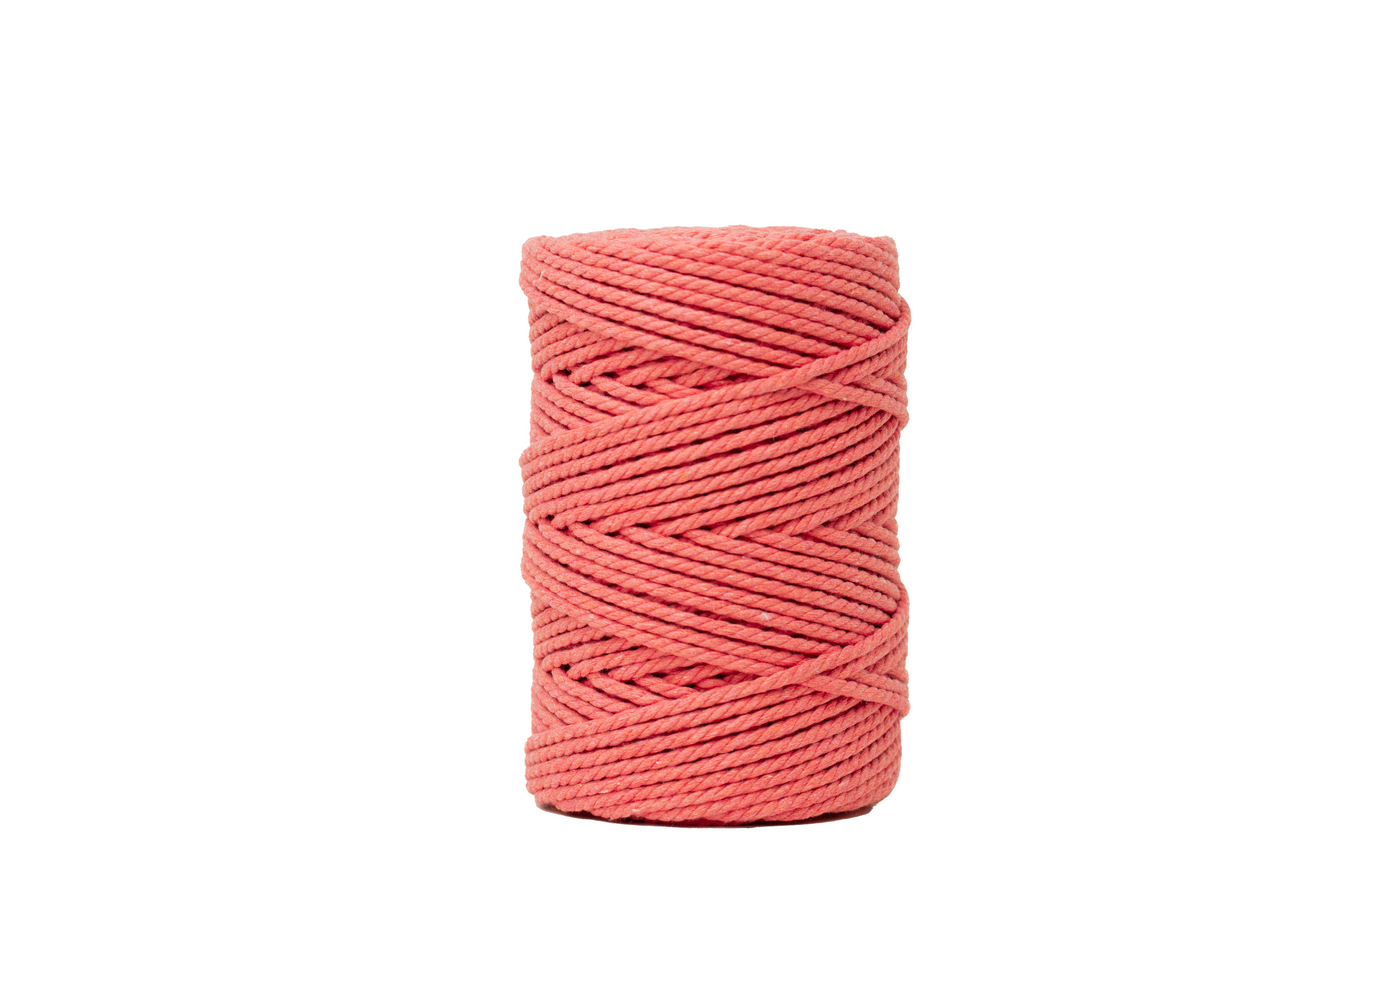 COTTON ROPE ZERO WASTE 3 MM - 3 PLY - CORAL COLOR